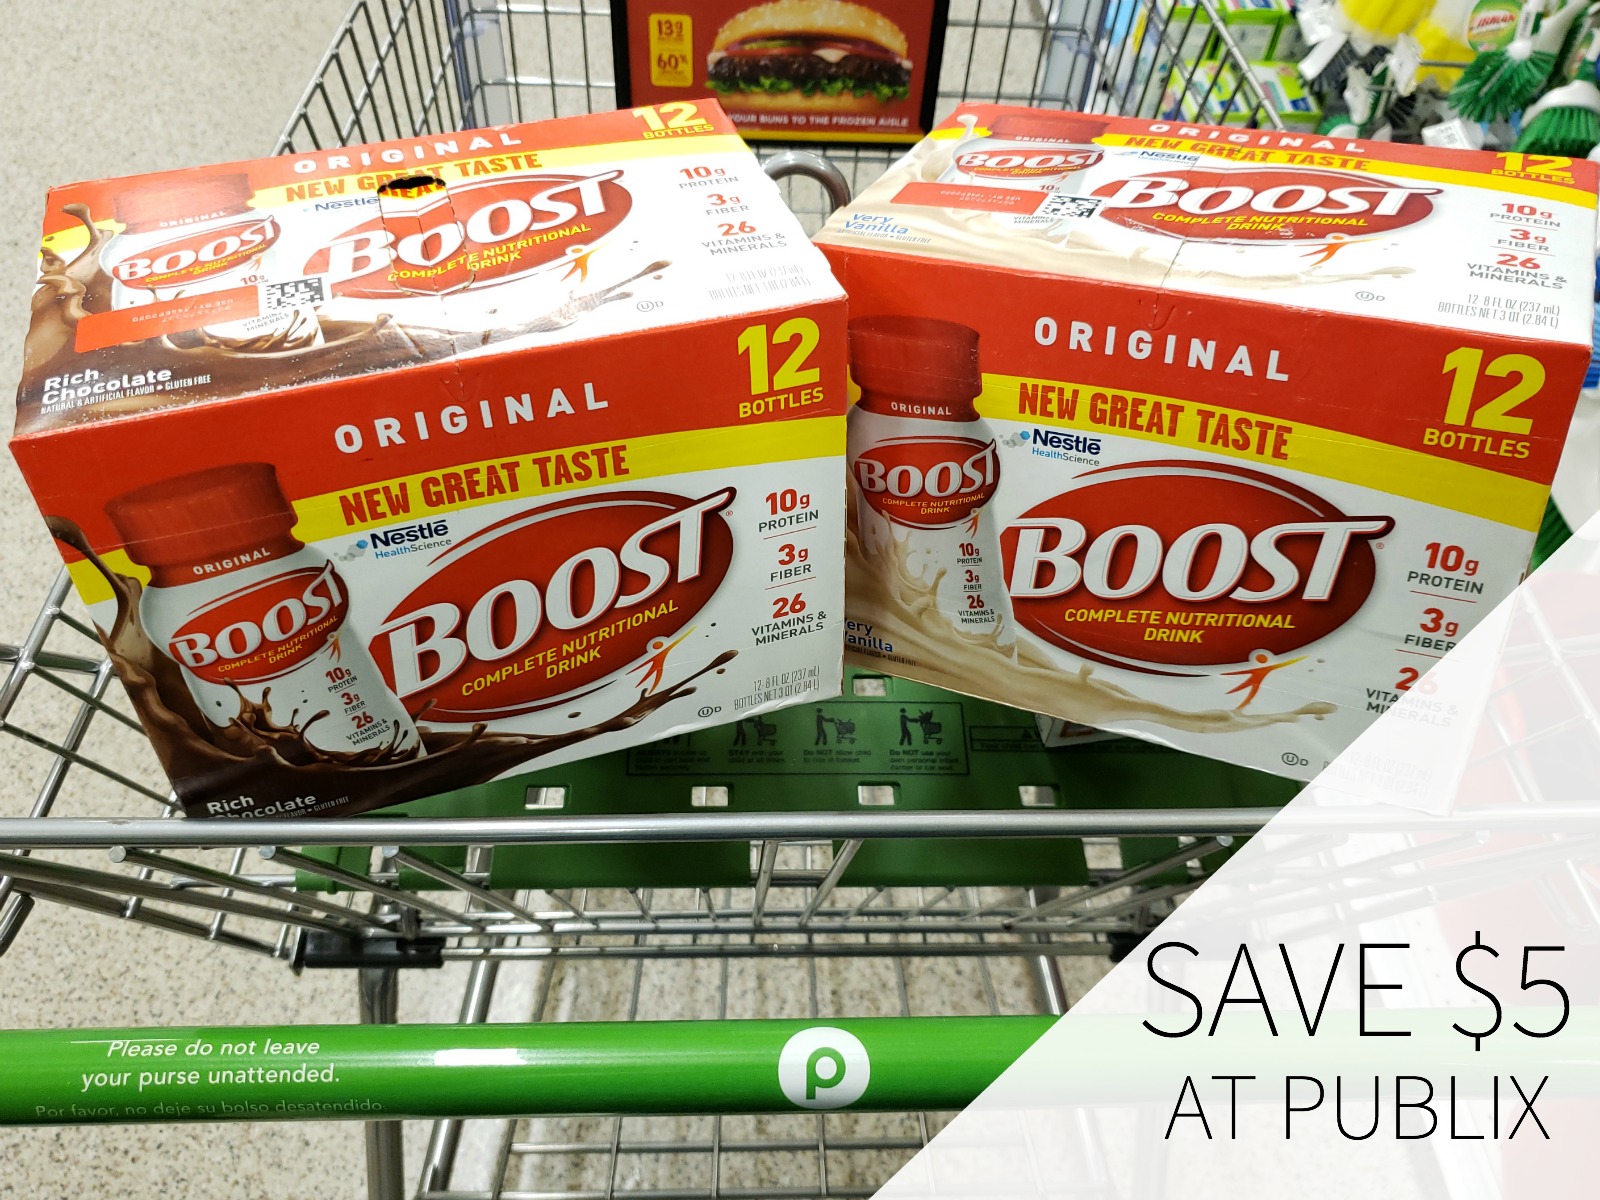 High Value Publix Coupon To Save On BOOST® Nutritional Drinks on I Heart Publix 2